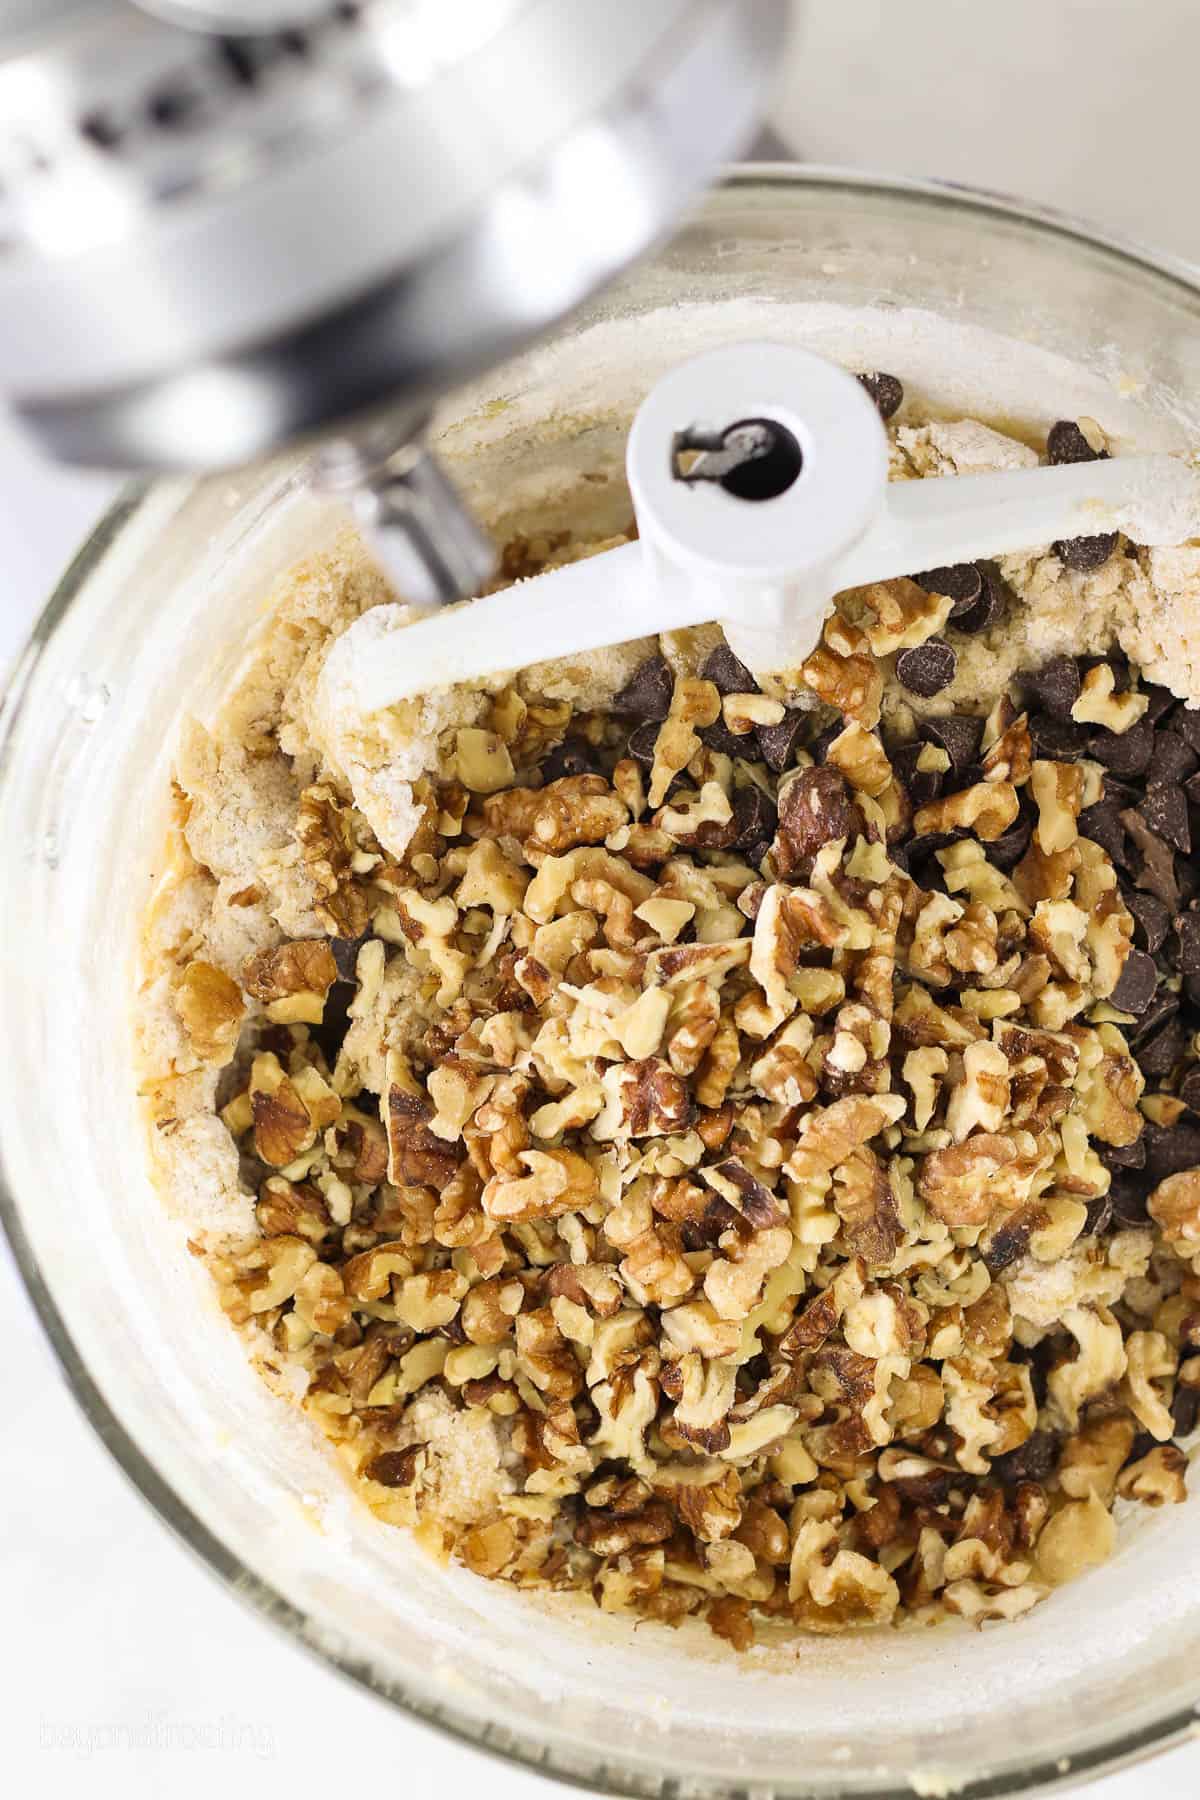 A stand mixer with chopped walnuts and chocolate chips in a glass mixing bowl